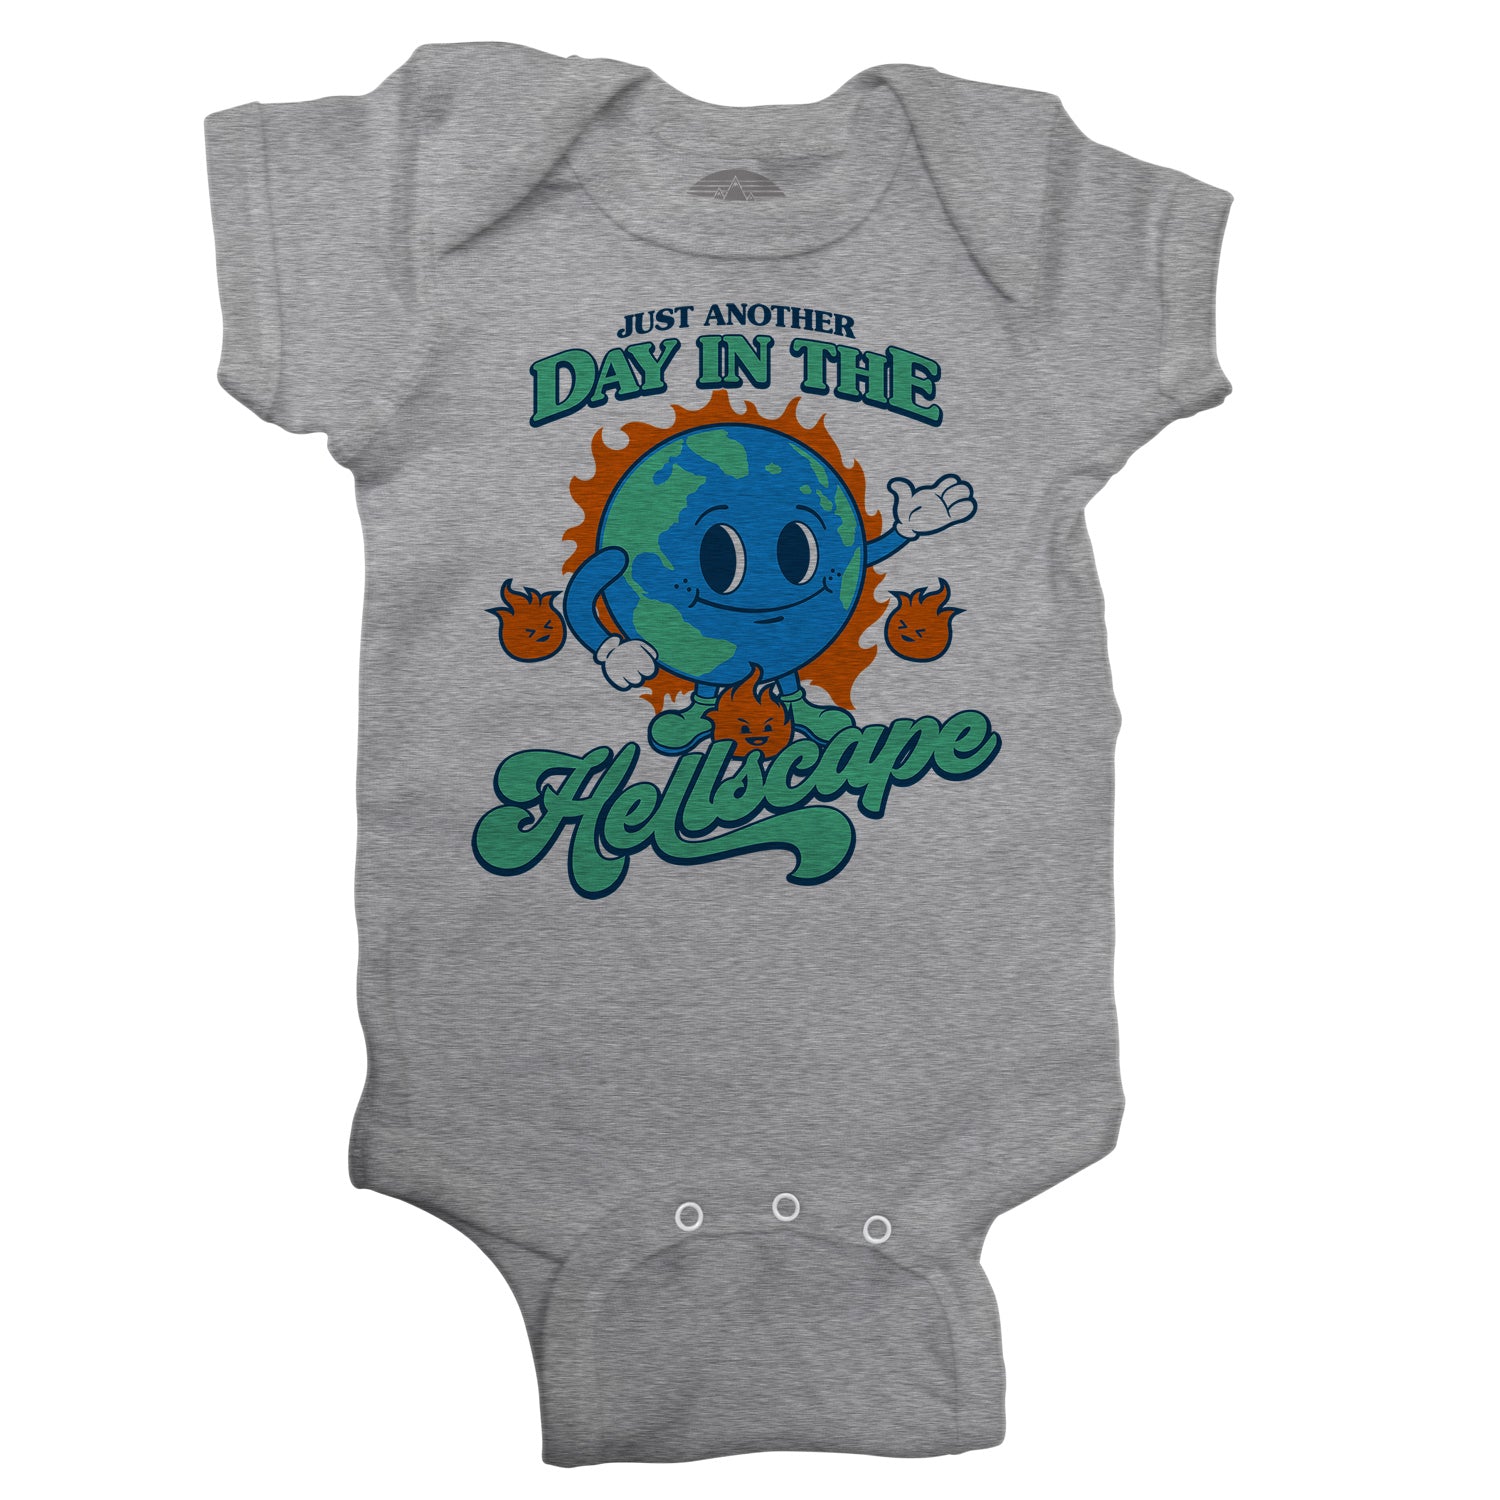 Just Another Day in the Hellscape Infant Bodysuit - Unisex Fit